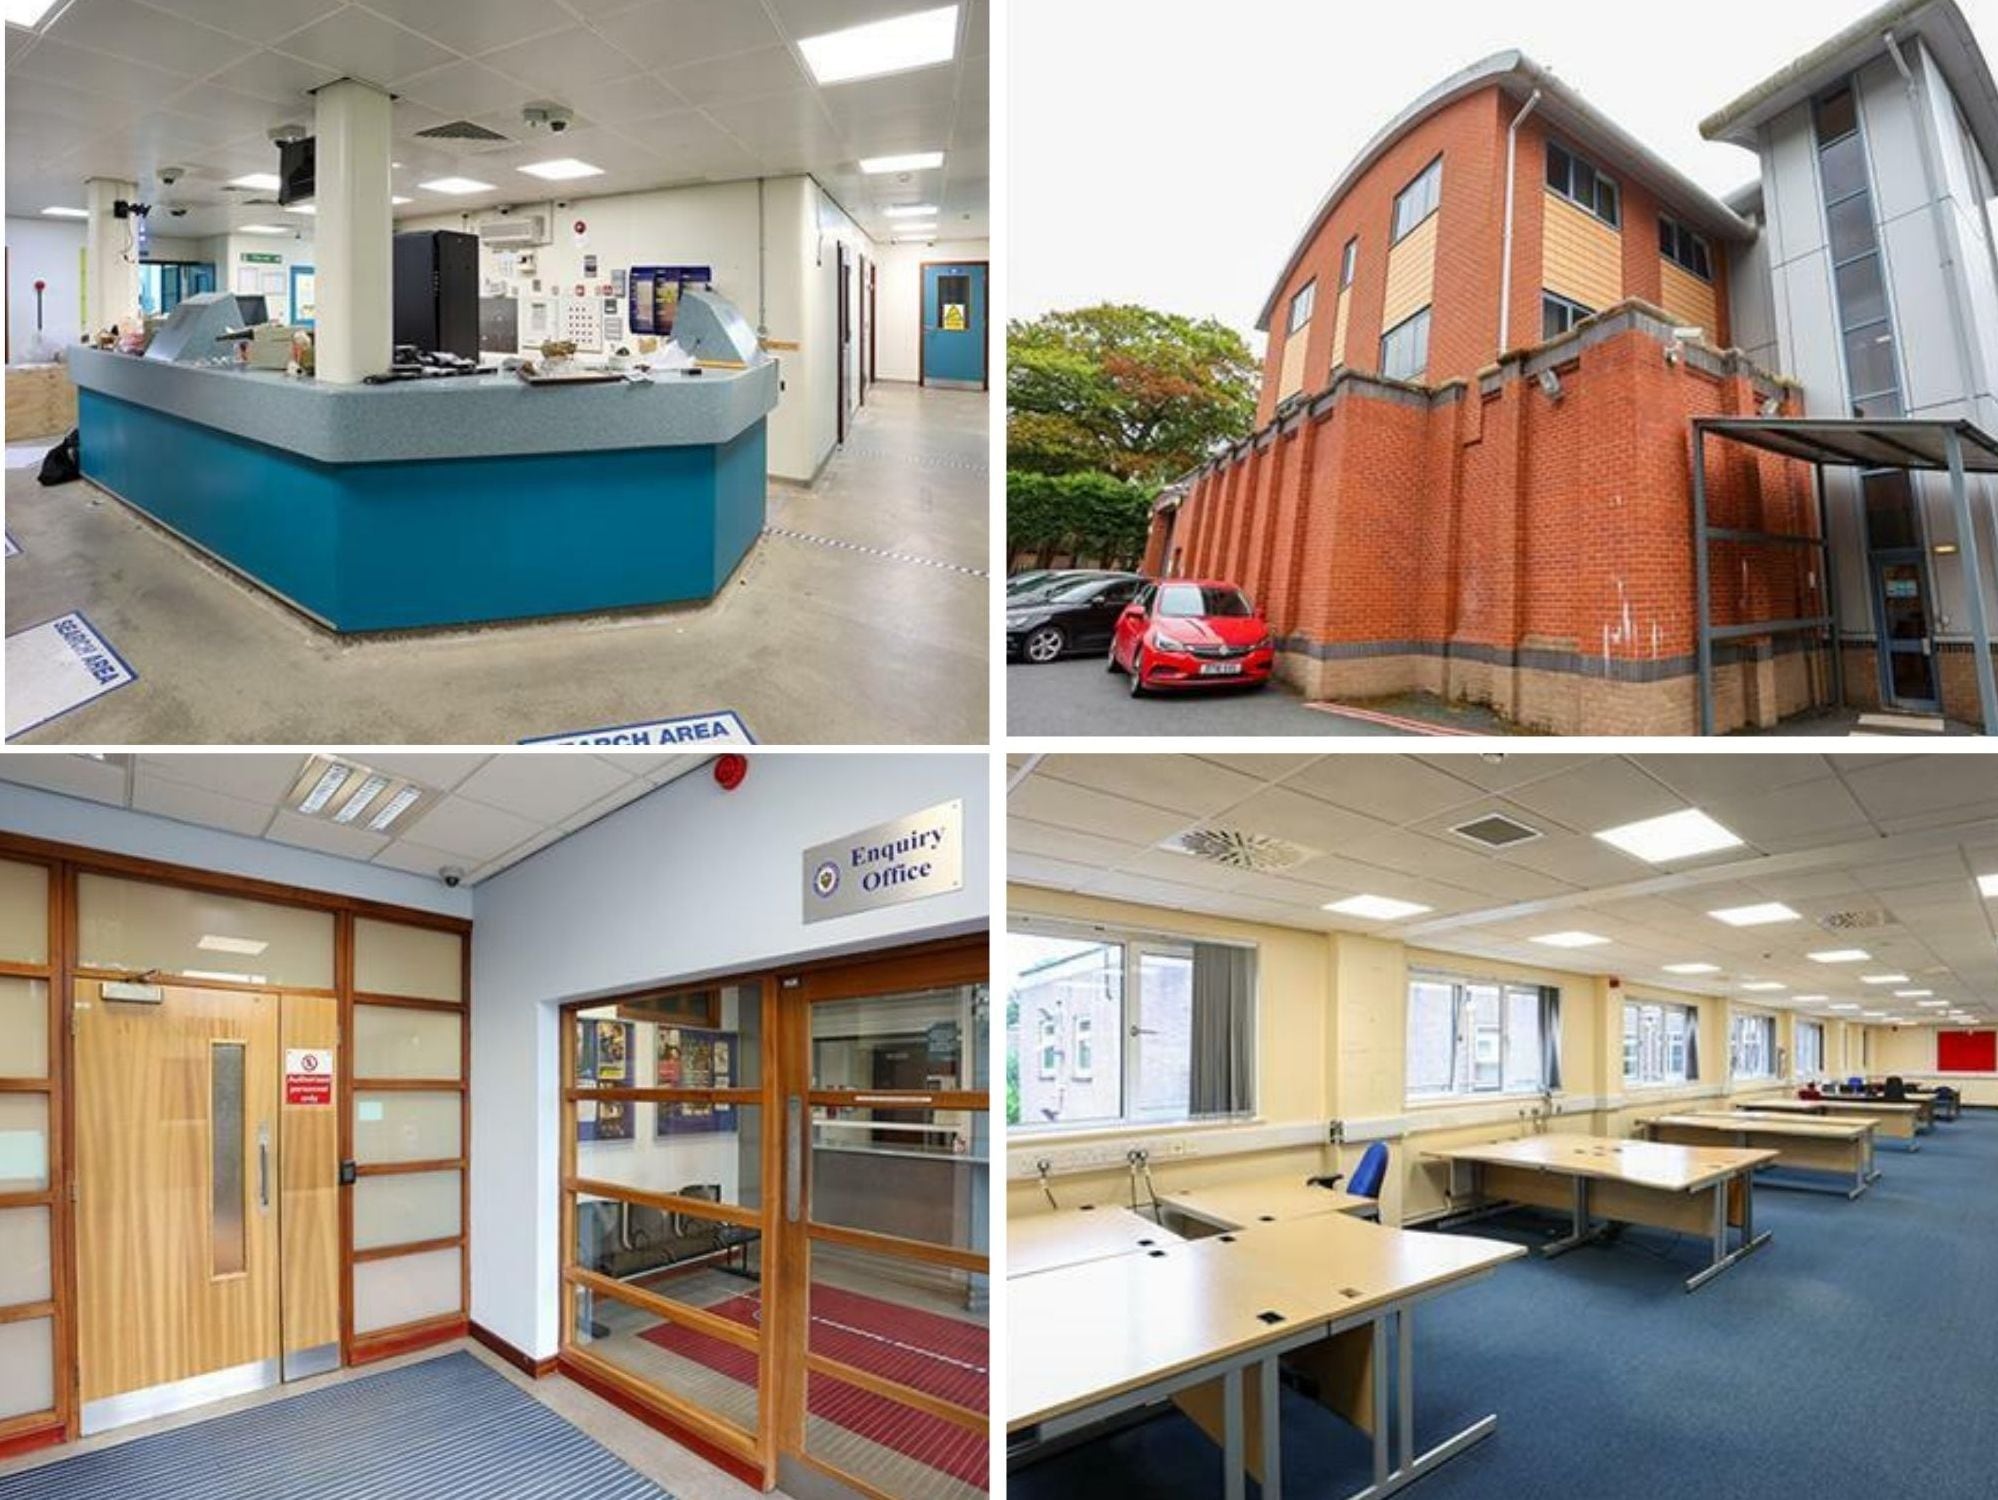 See inside town's police station listed on Rightmove – complete with holding cells for suspects